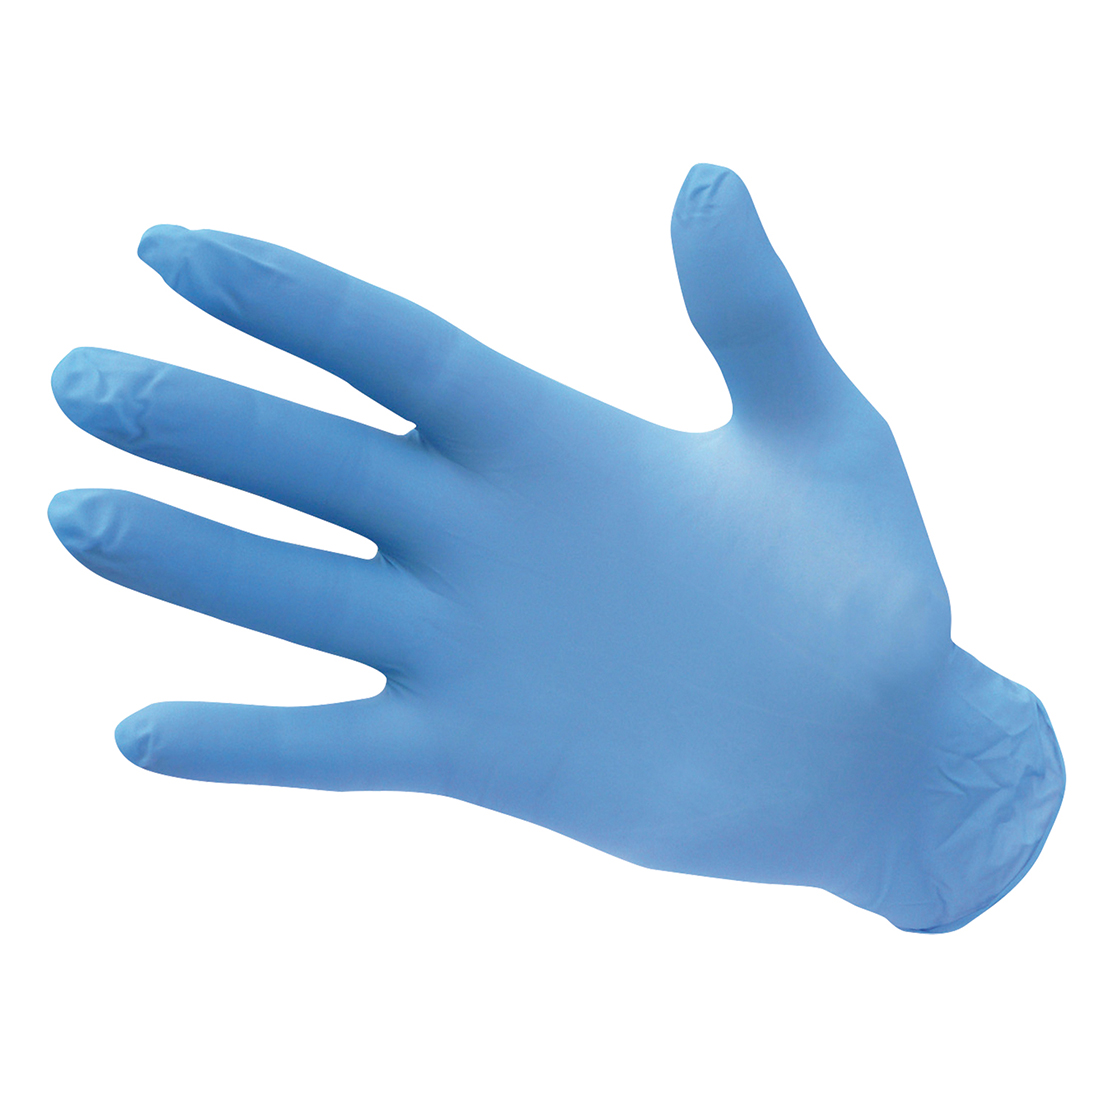 HAND PROTECTION, Disposable Gloves